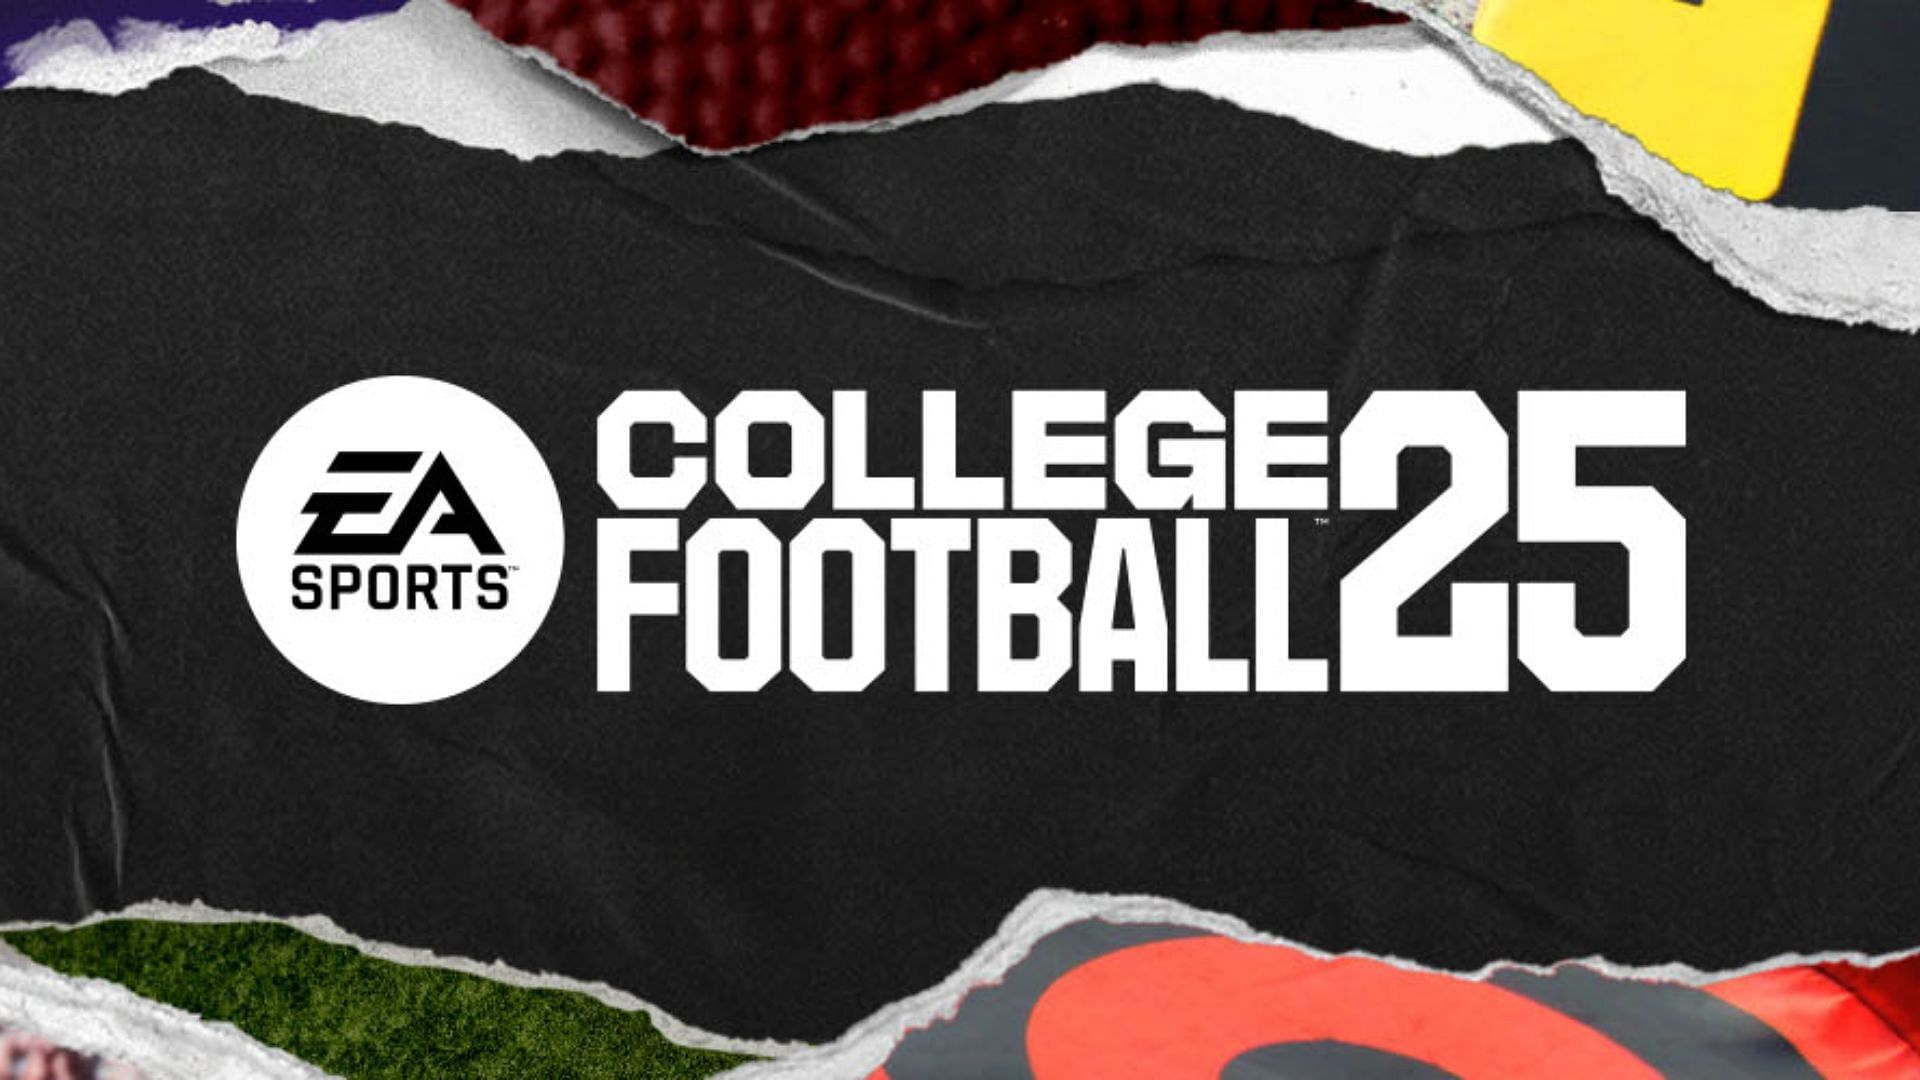 EA Sports College Football 25 news was released today